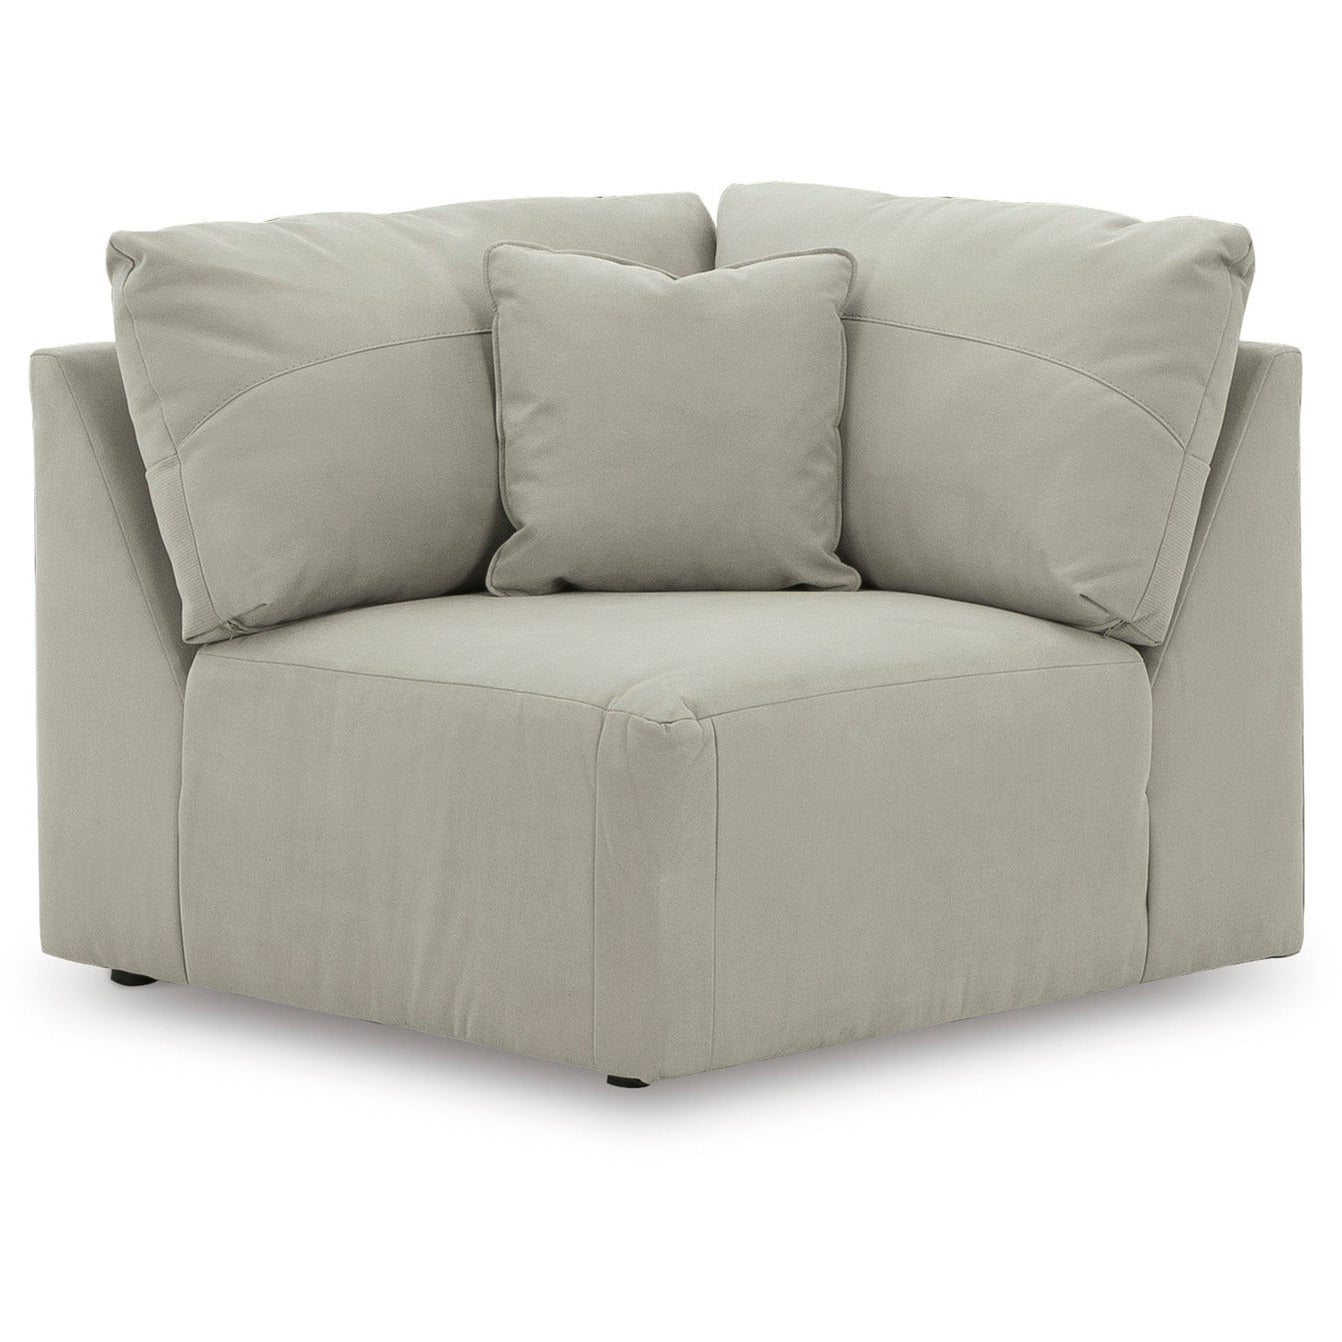 NEXT-GEN GAUCHO 3 PC SECTIONAL SOFA WITH CHAISE - GRAY